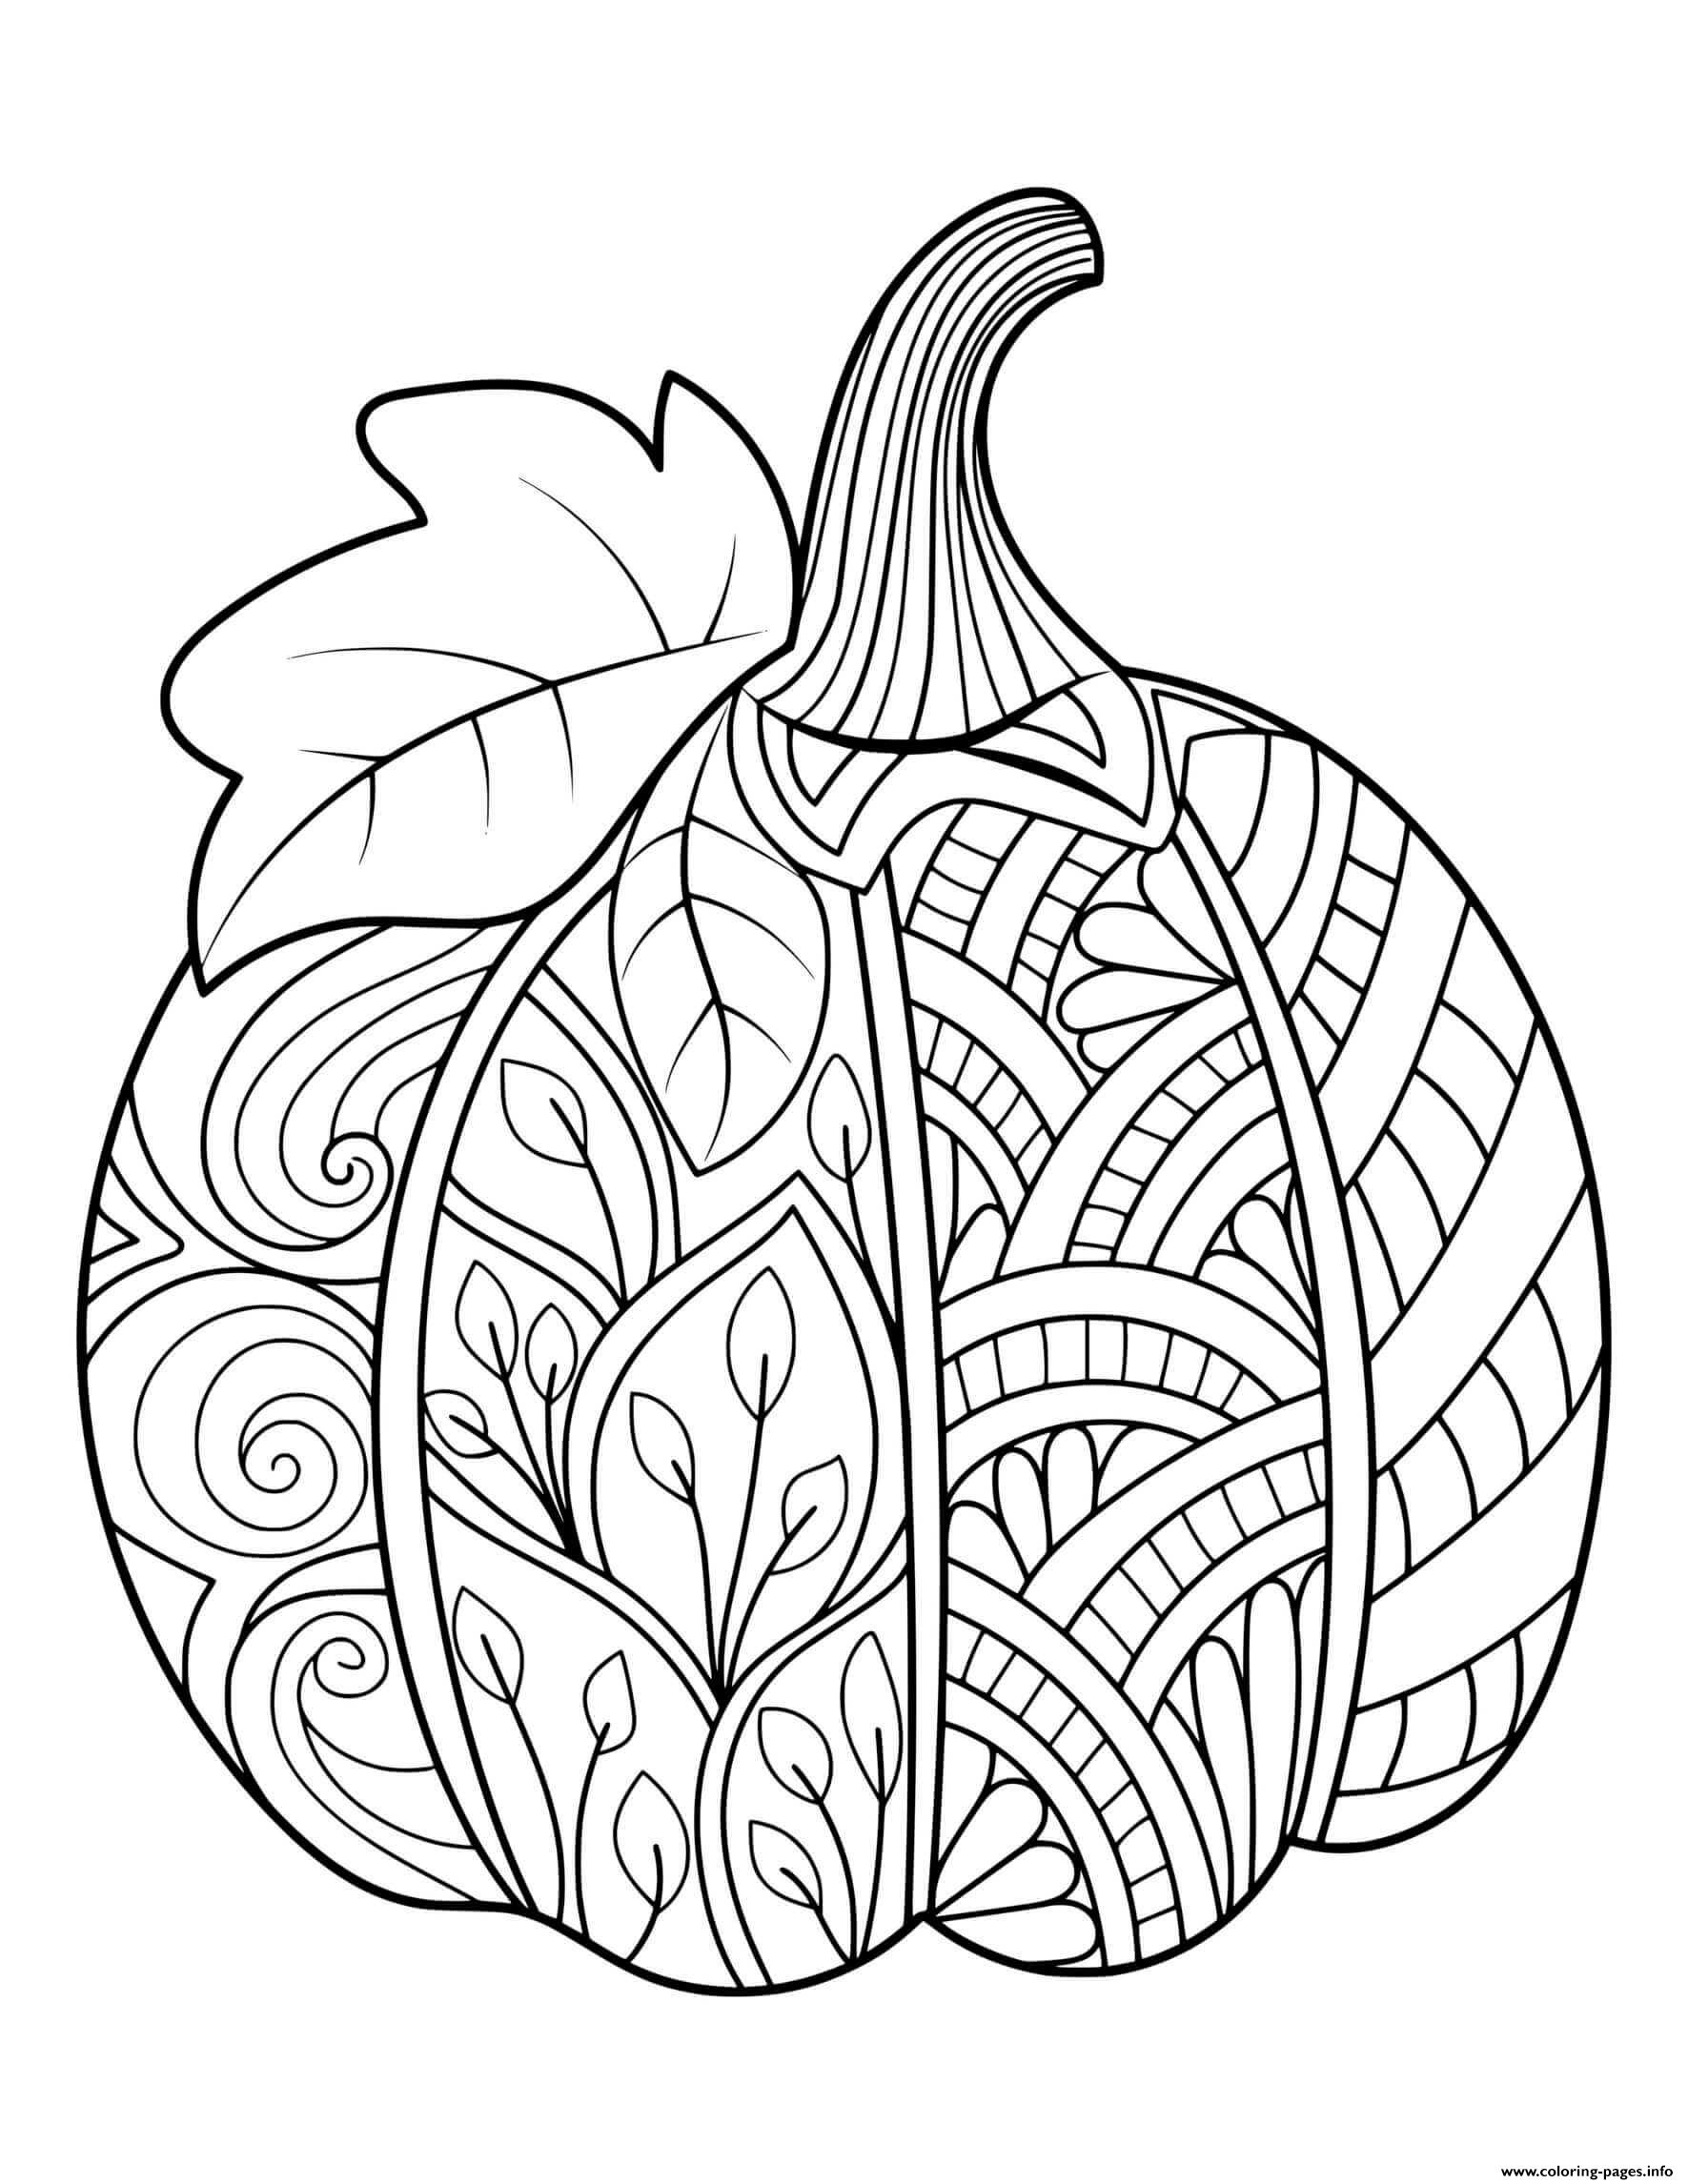 pumpkin-decorative-patterned-pumpkin-with-leaf-coloring-page-printable